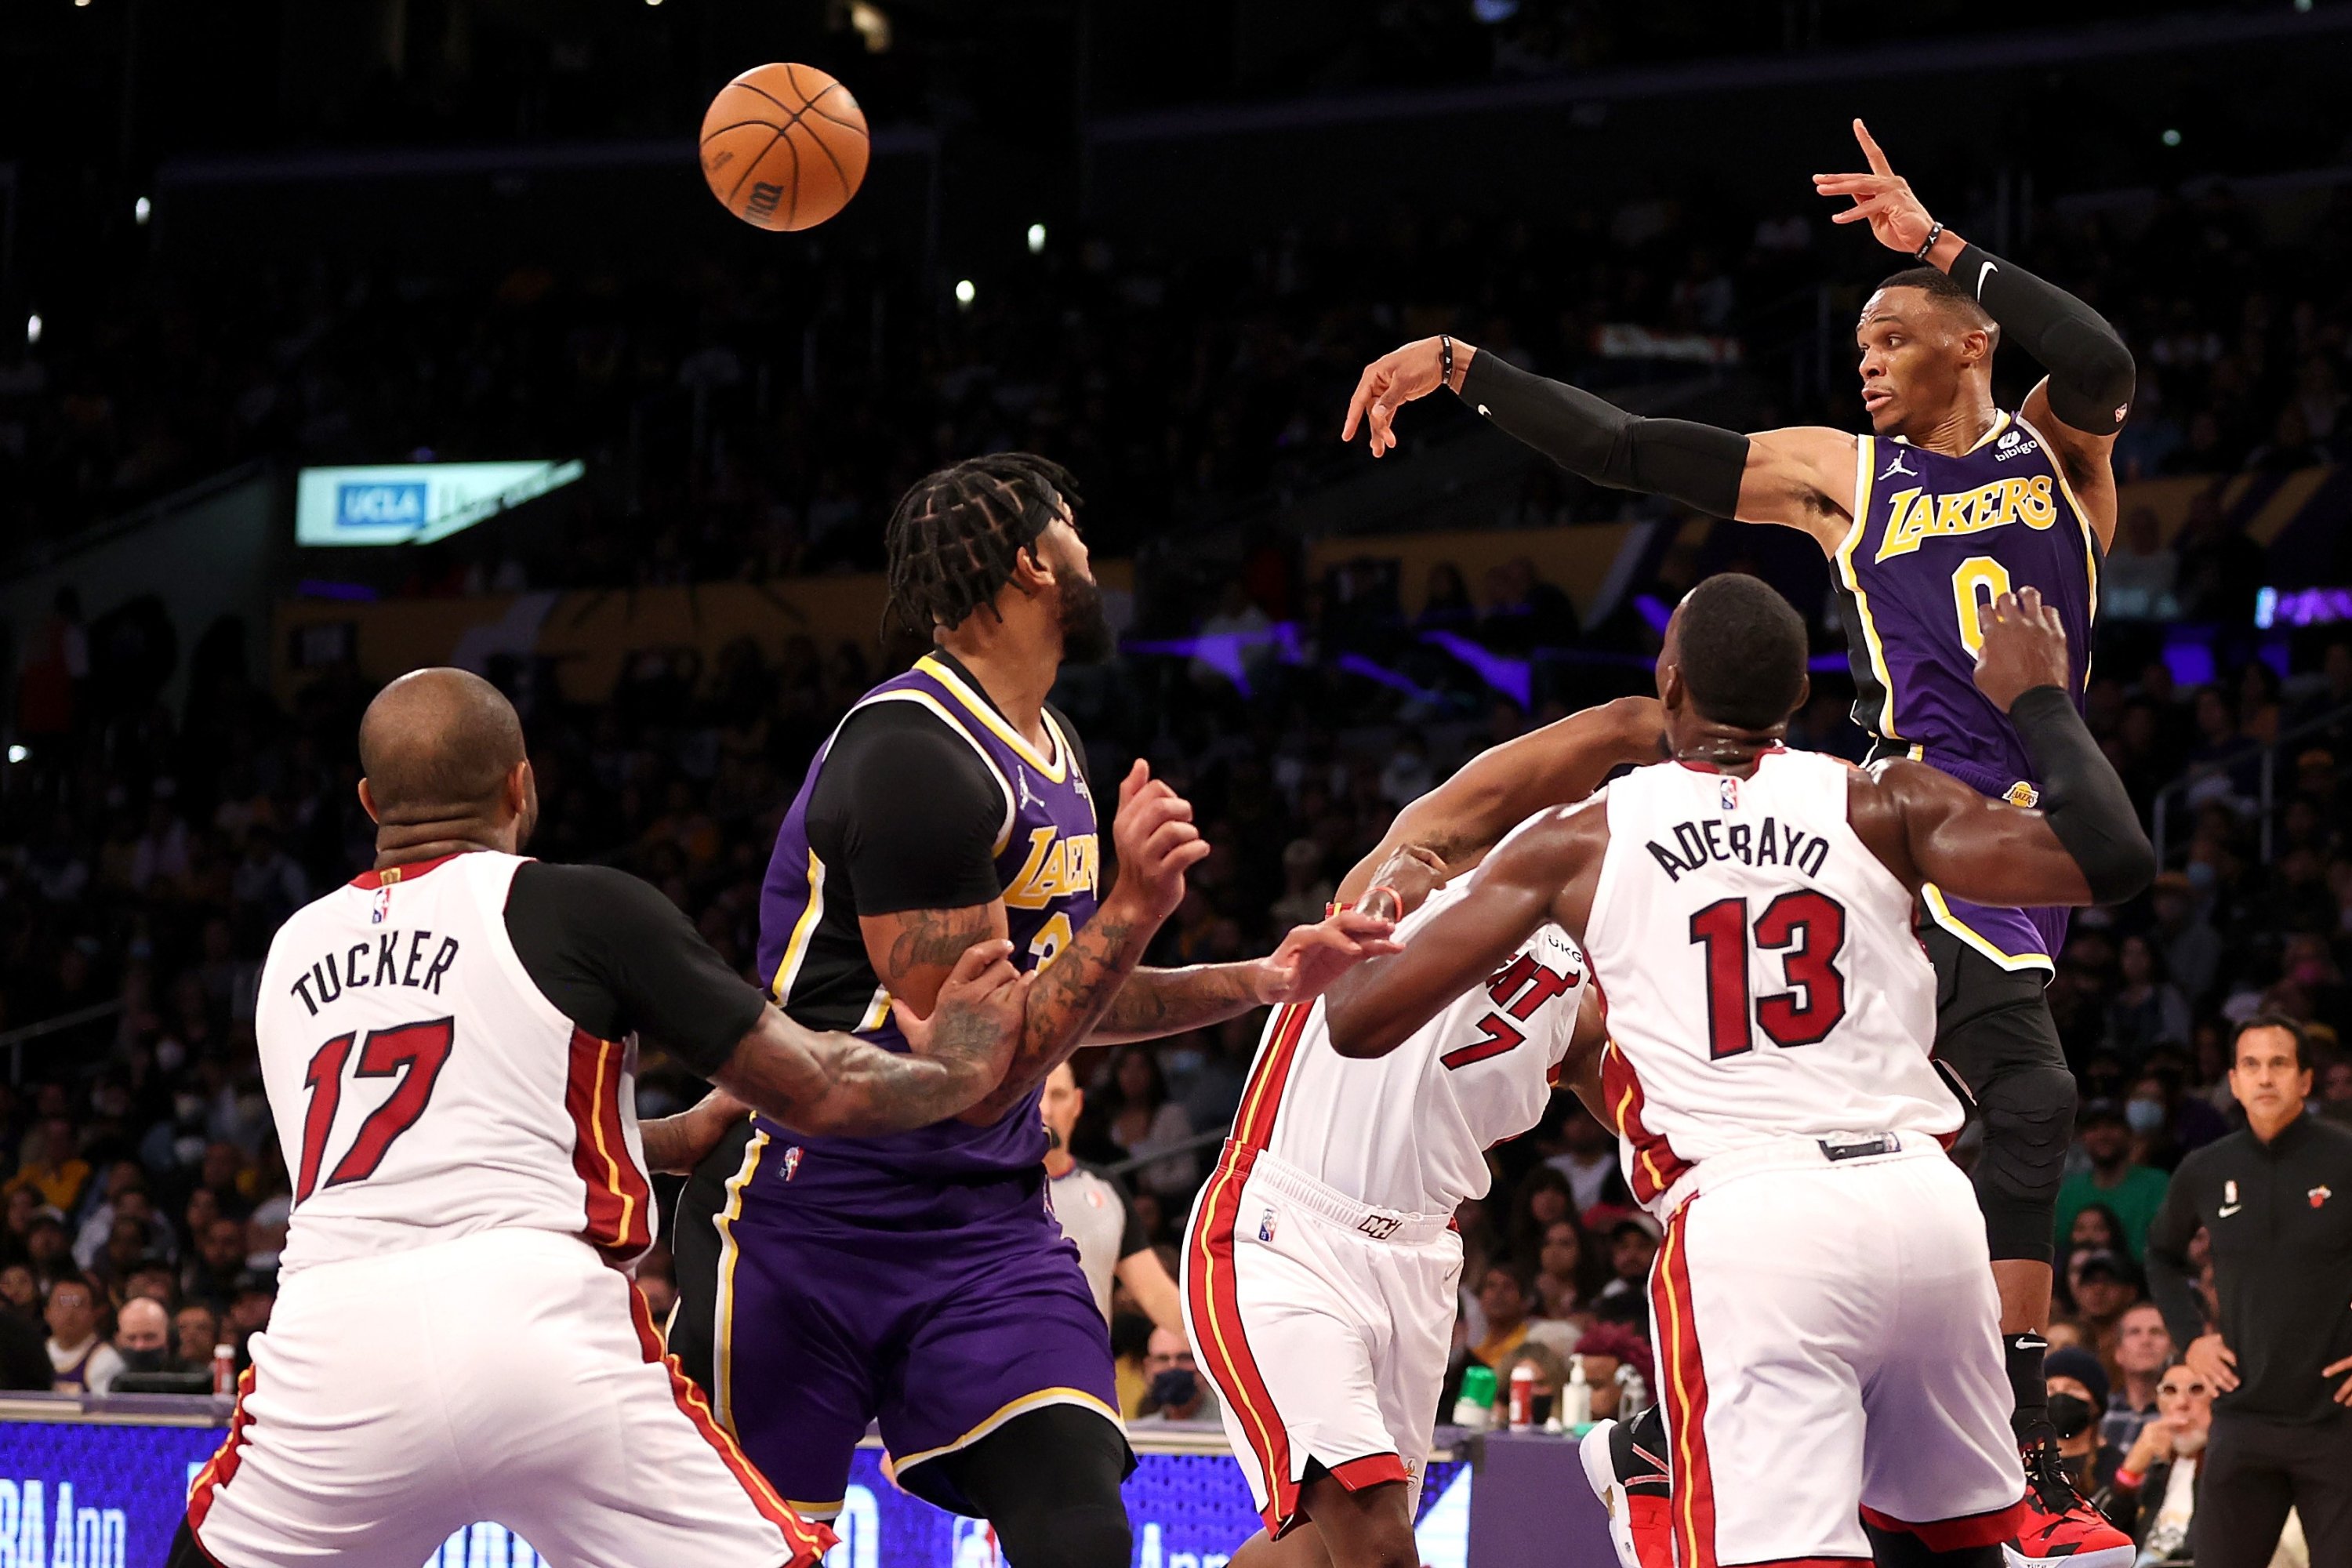 LA Lakers' Russell Westbrook passes the ball past Miami Heat players during an NBA game in Los Angeles, California, Nov. 10, 2021. (AFP Photo)